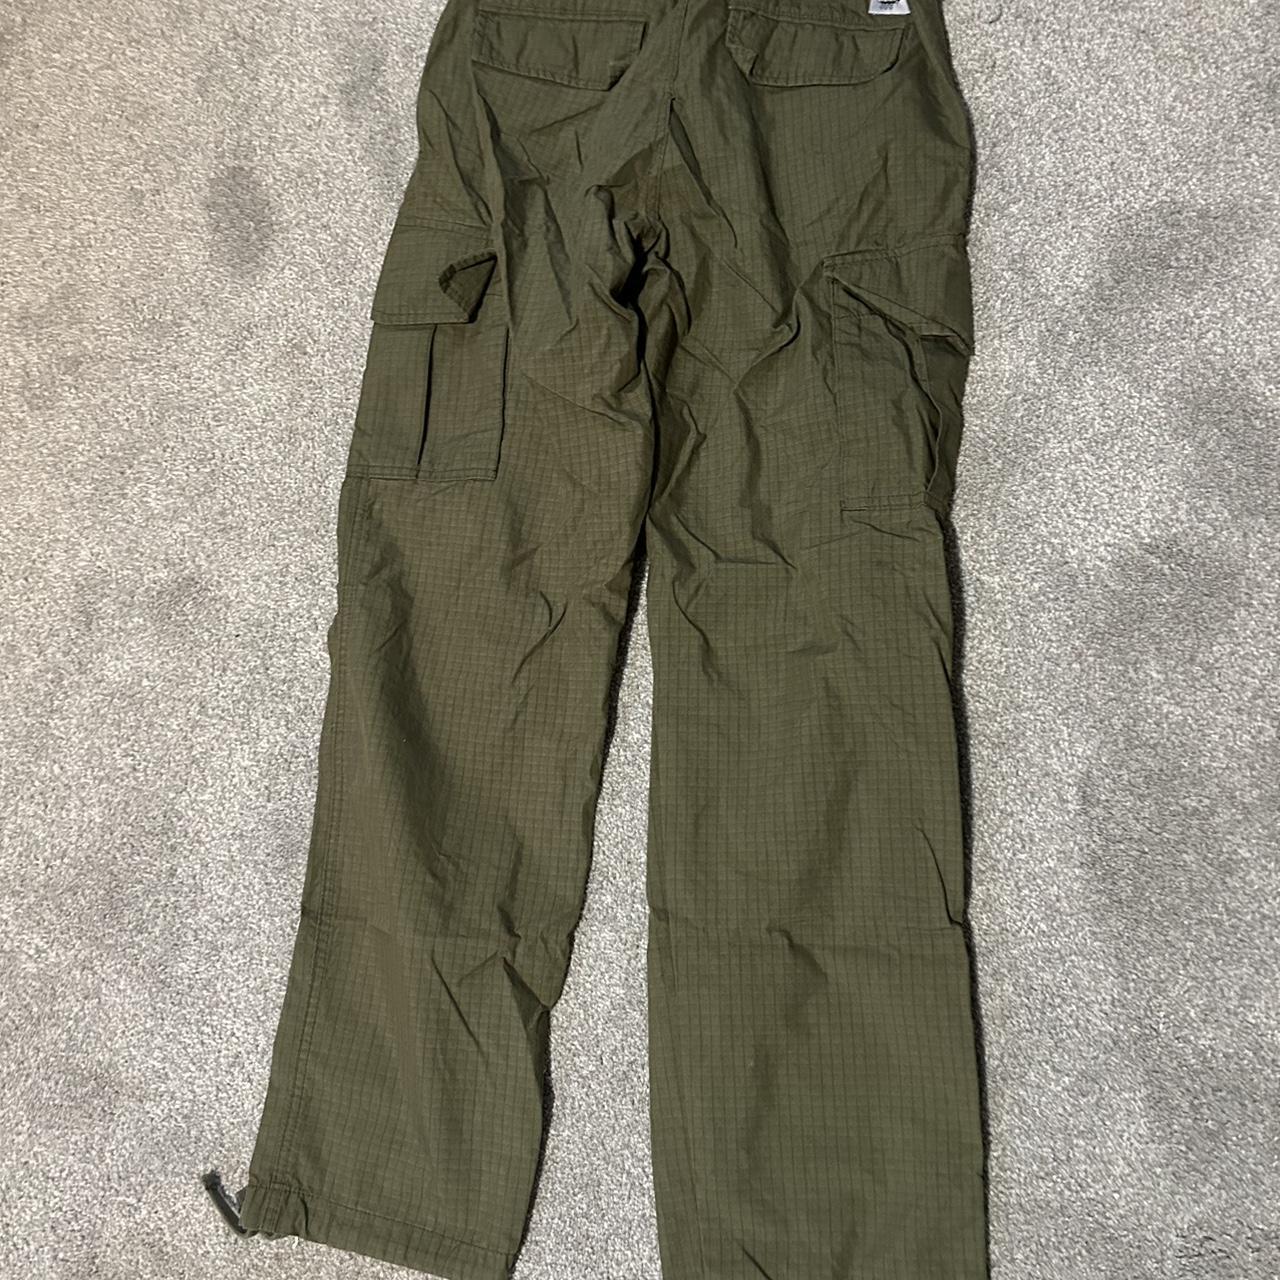 Bogs Men's Green and Khaki Trousers (2)